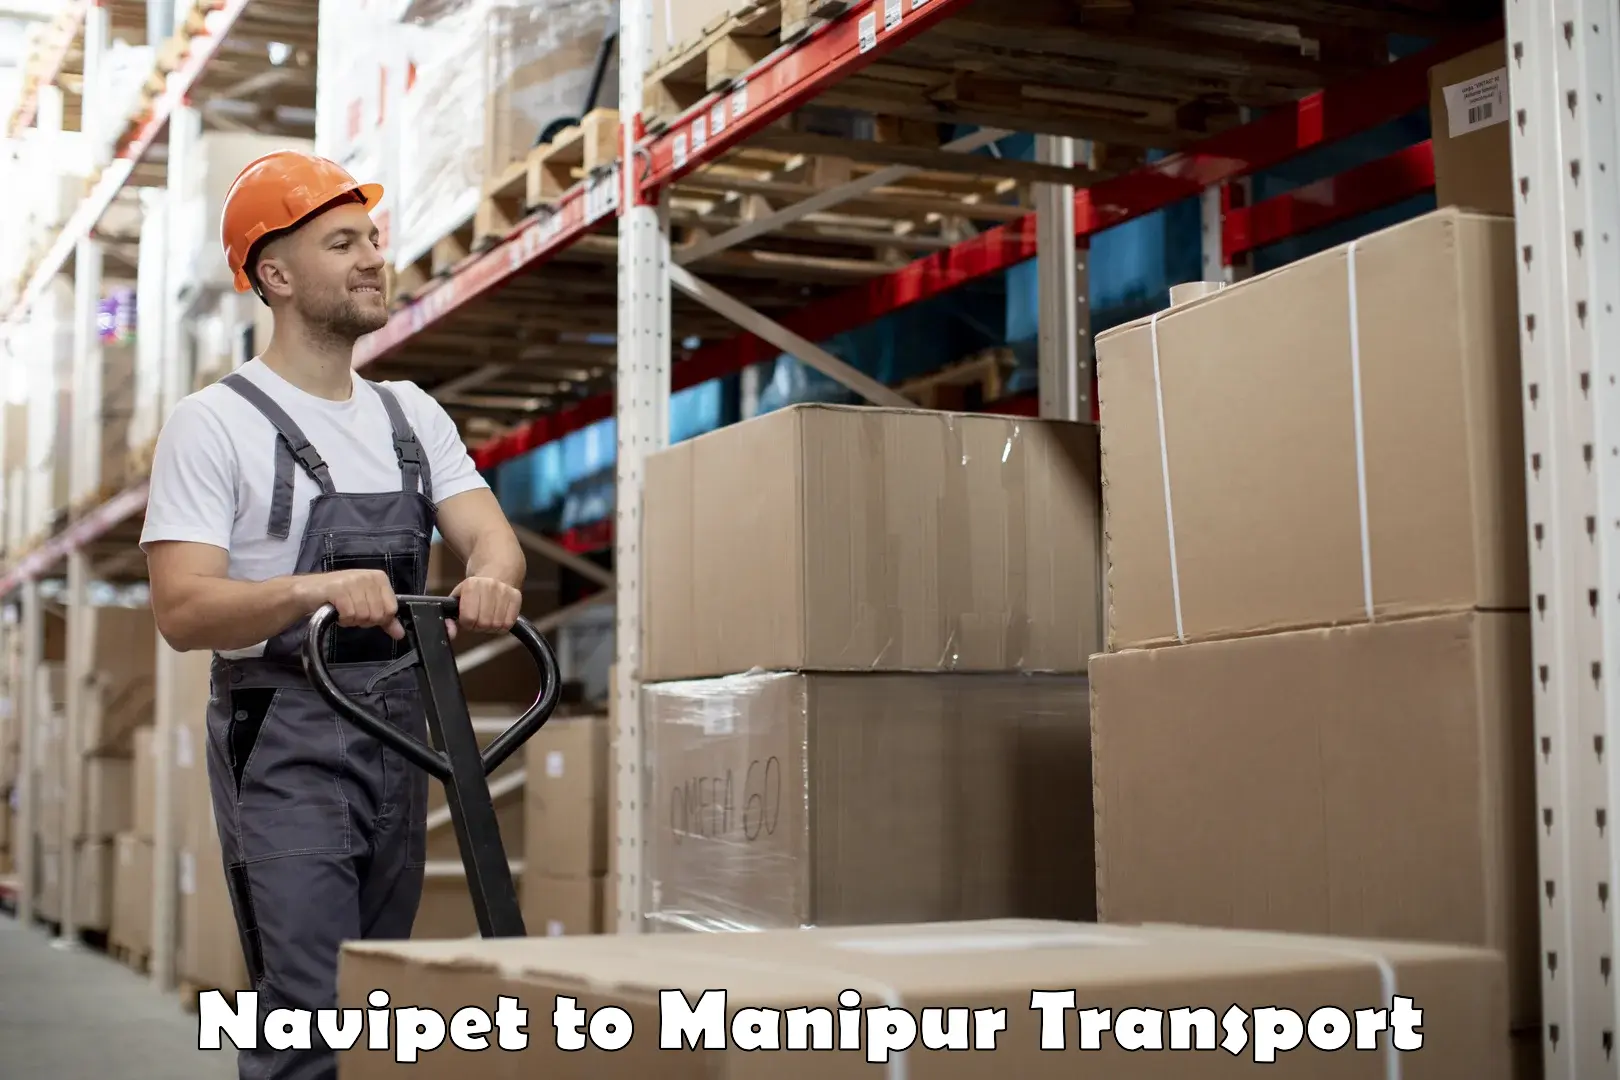 Nearby transport service Navipet to Manipur